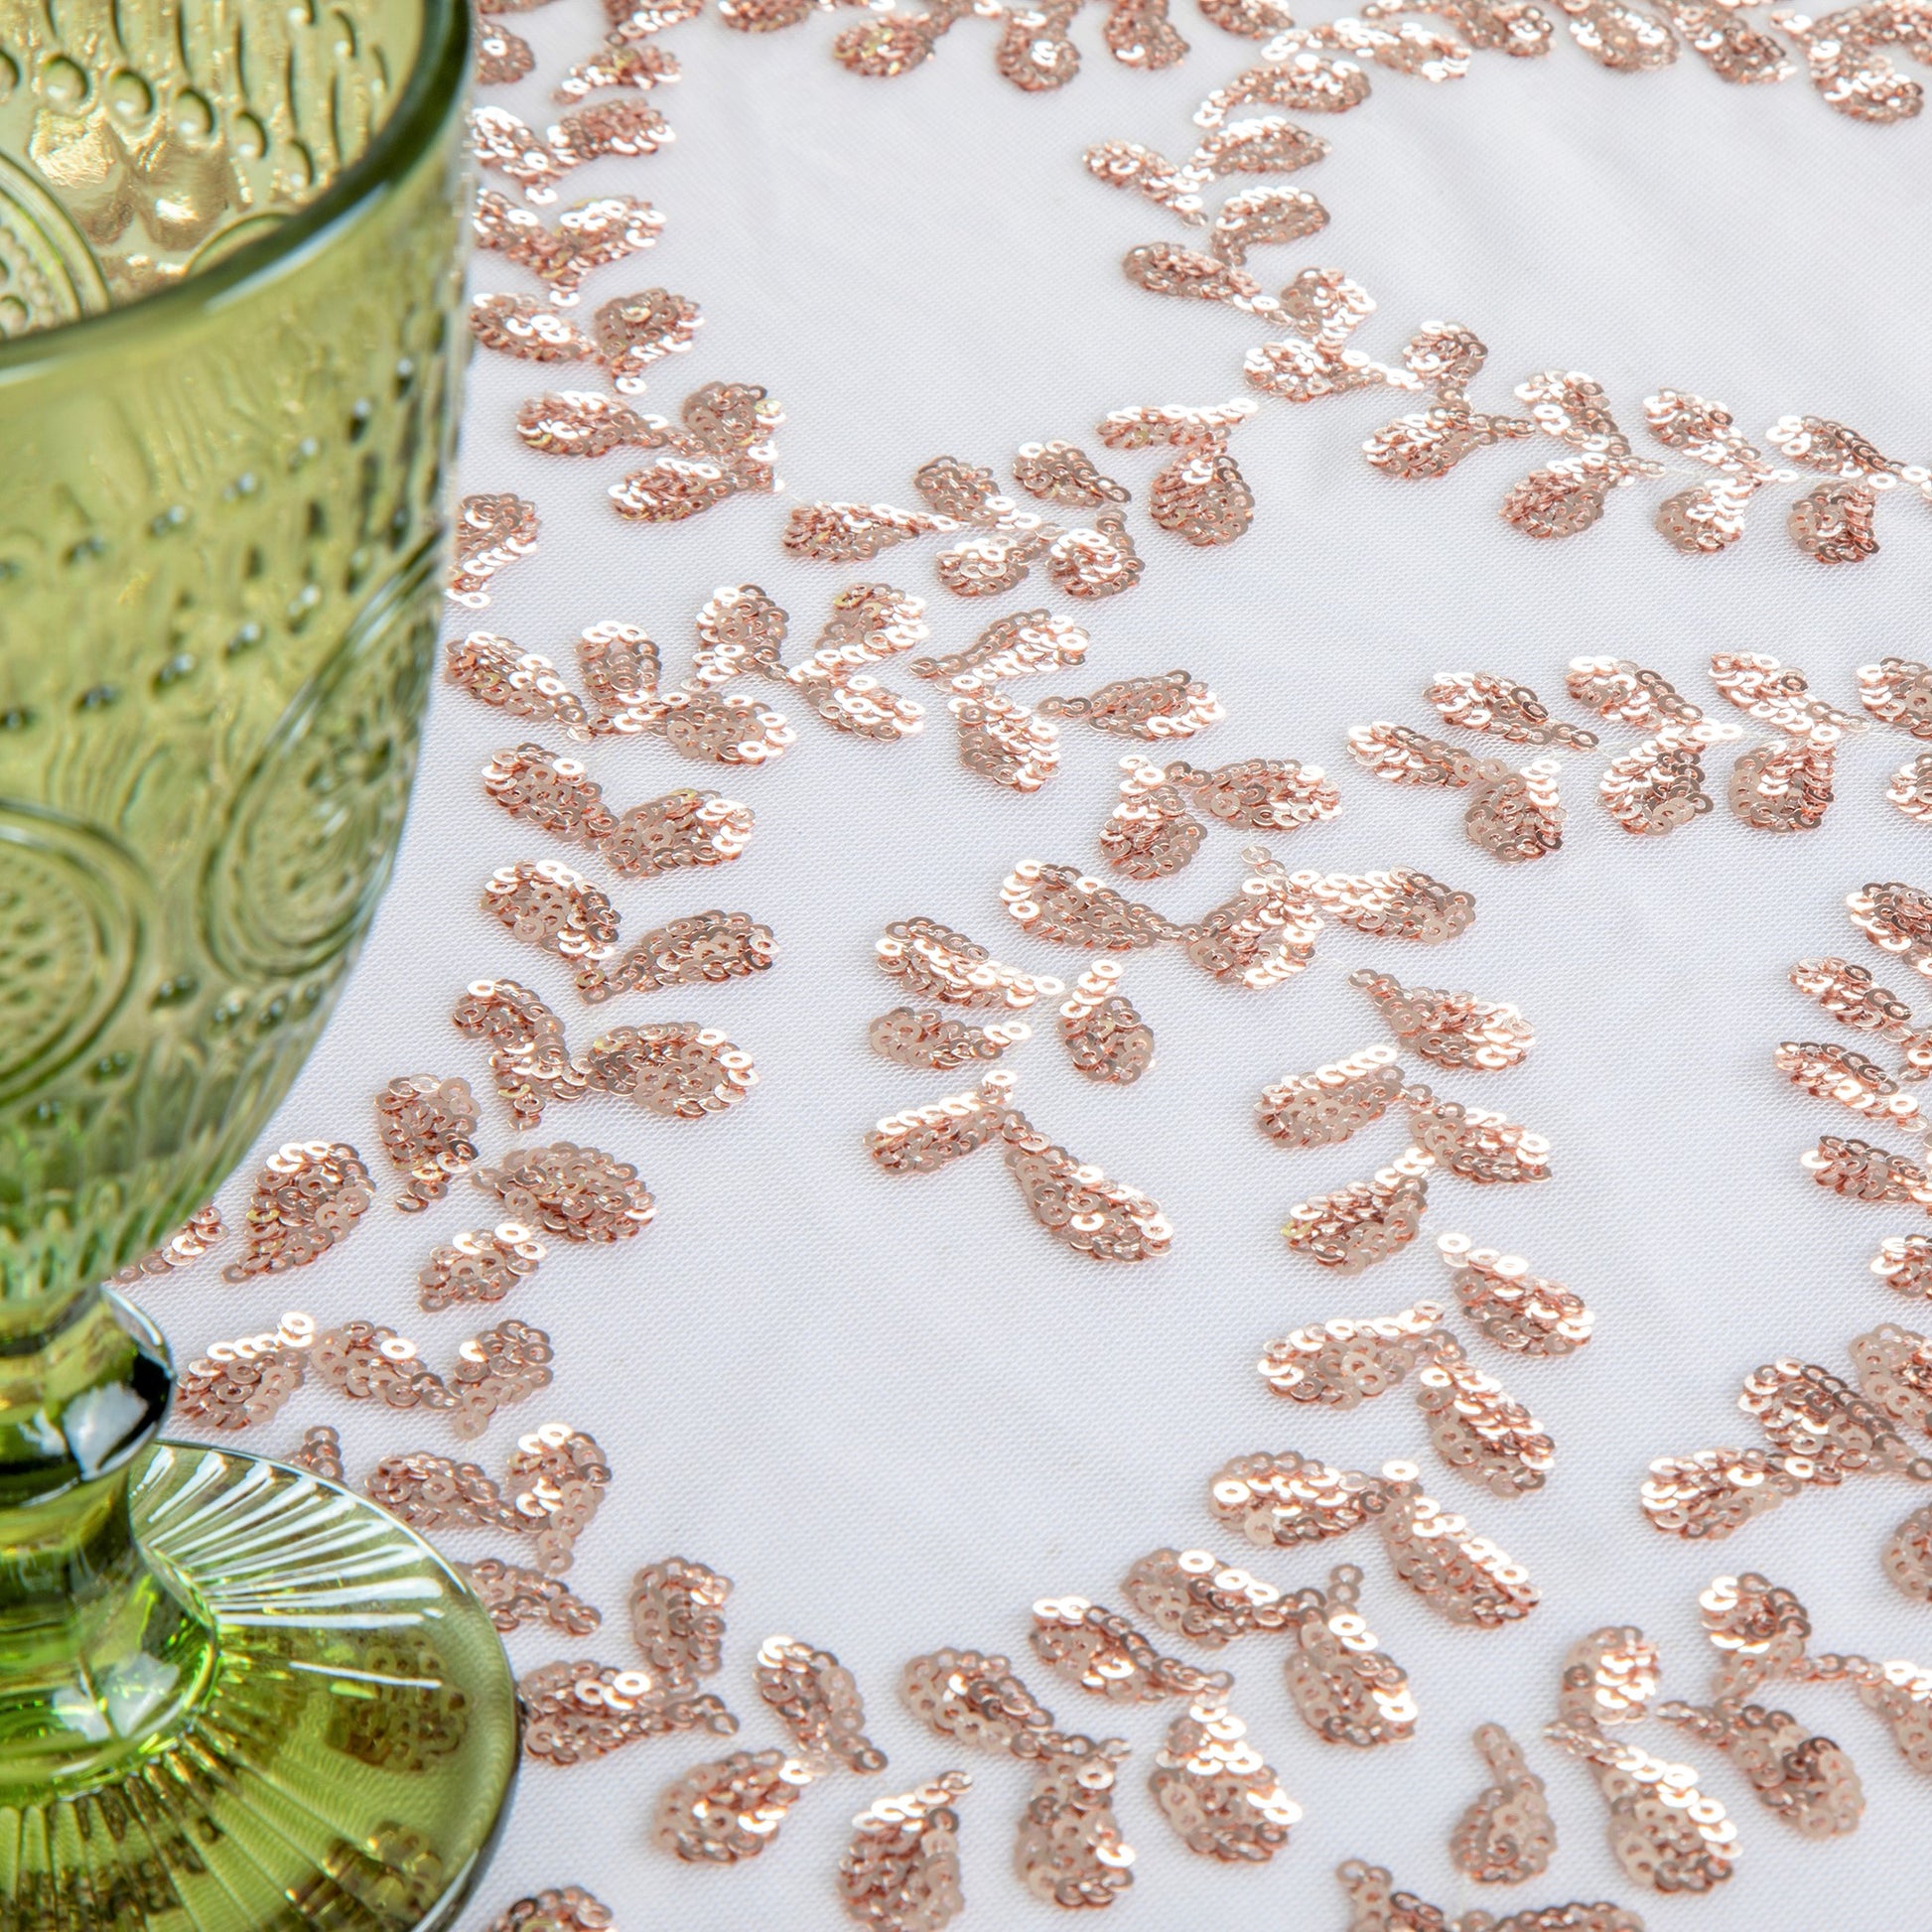 Sequin Vine Tablecloth Overlay 90"x132" Rectangle - Blush/Rose Gold